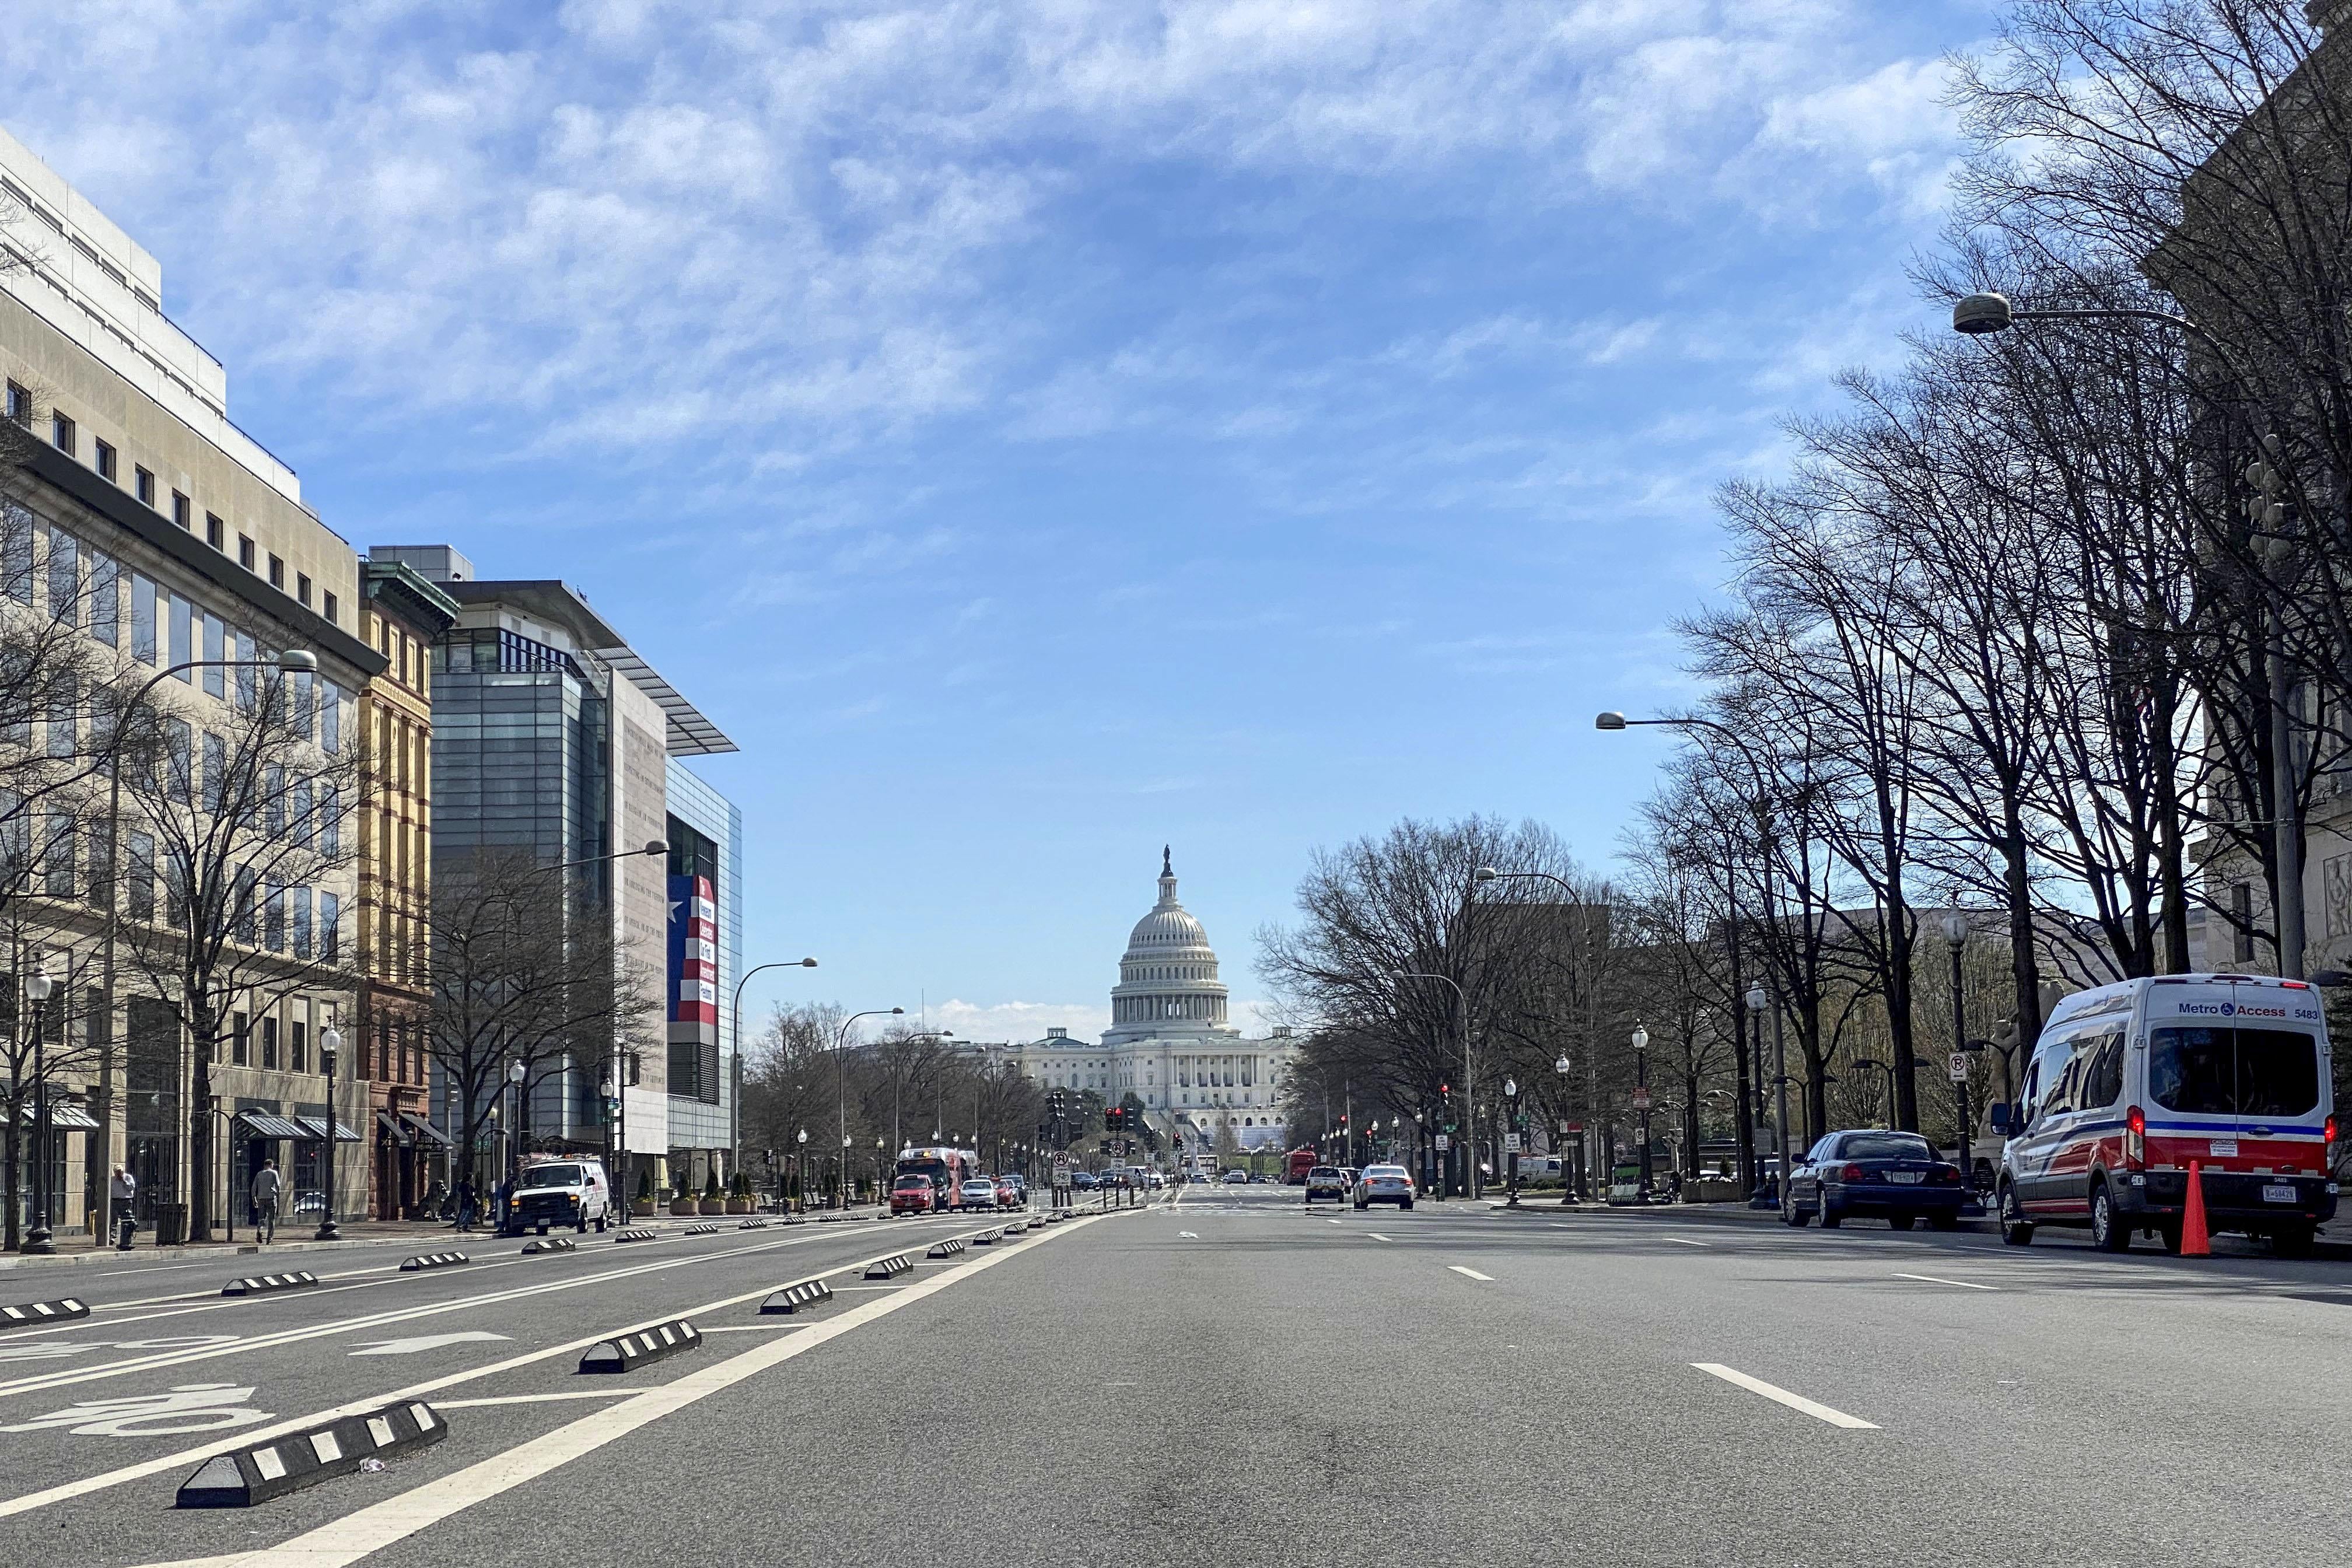 The Capitol as seen at the end of Pennsylvania Avenue.